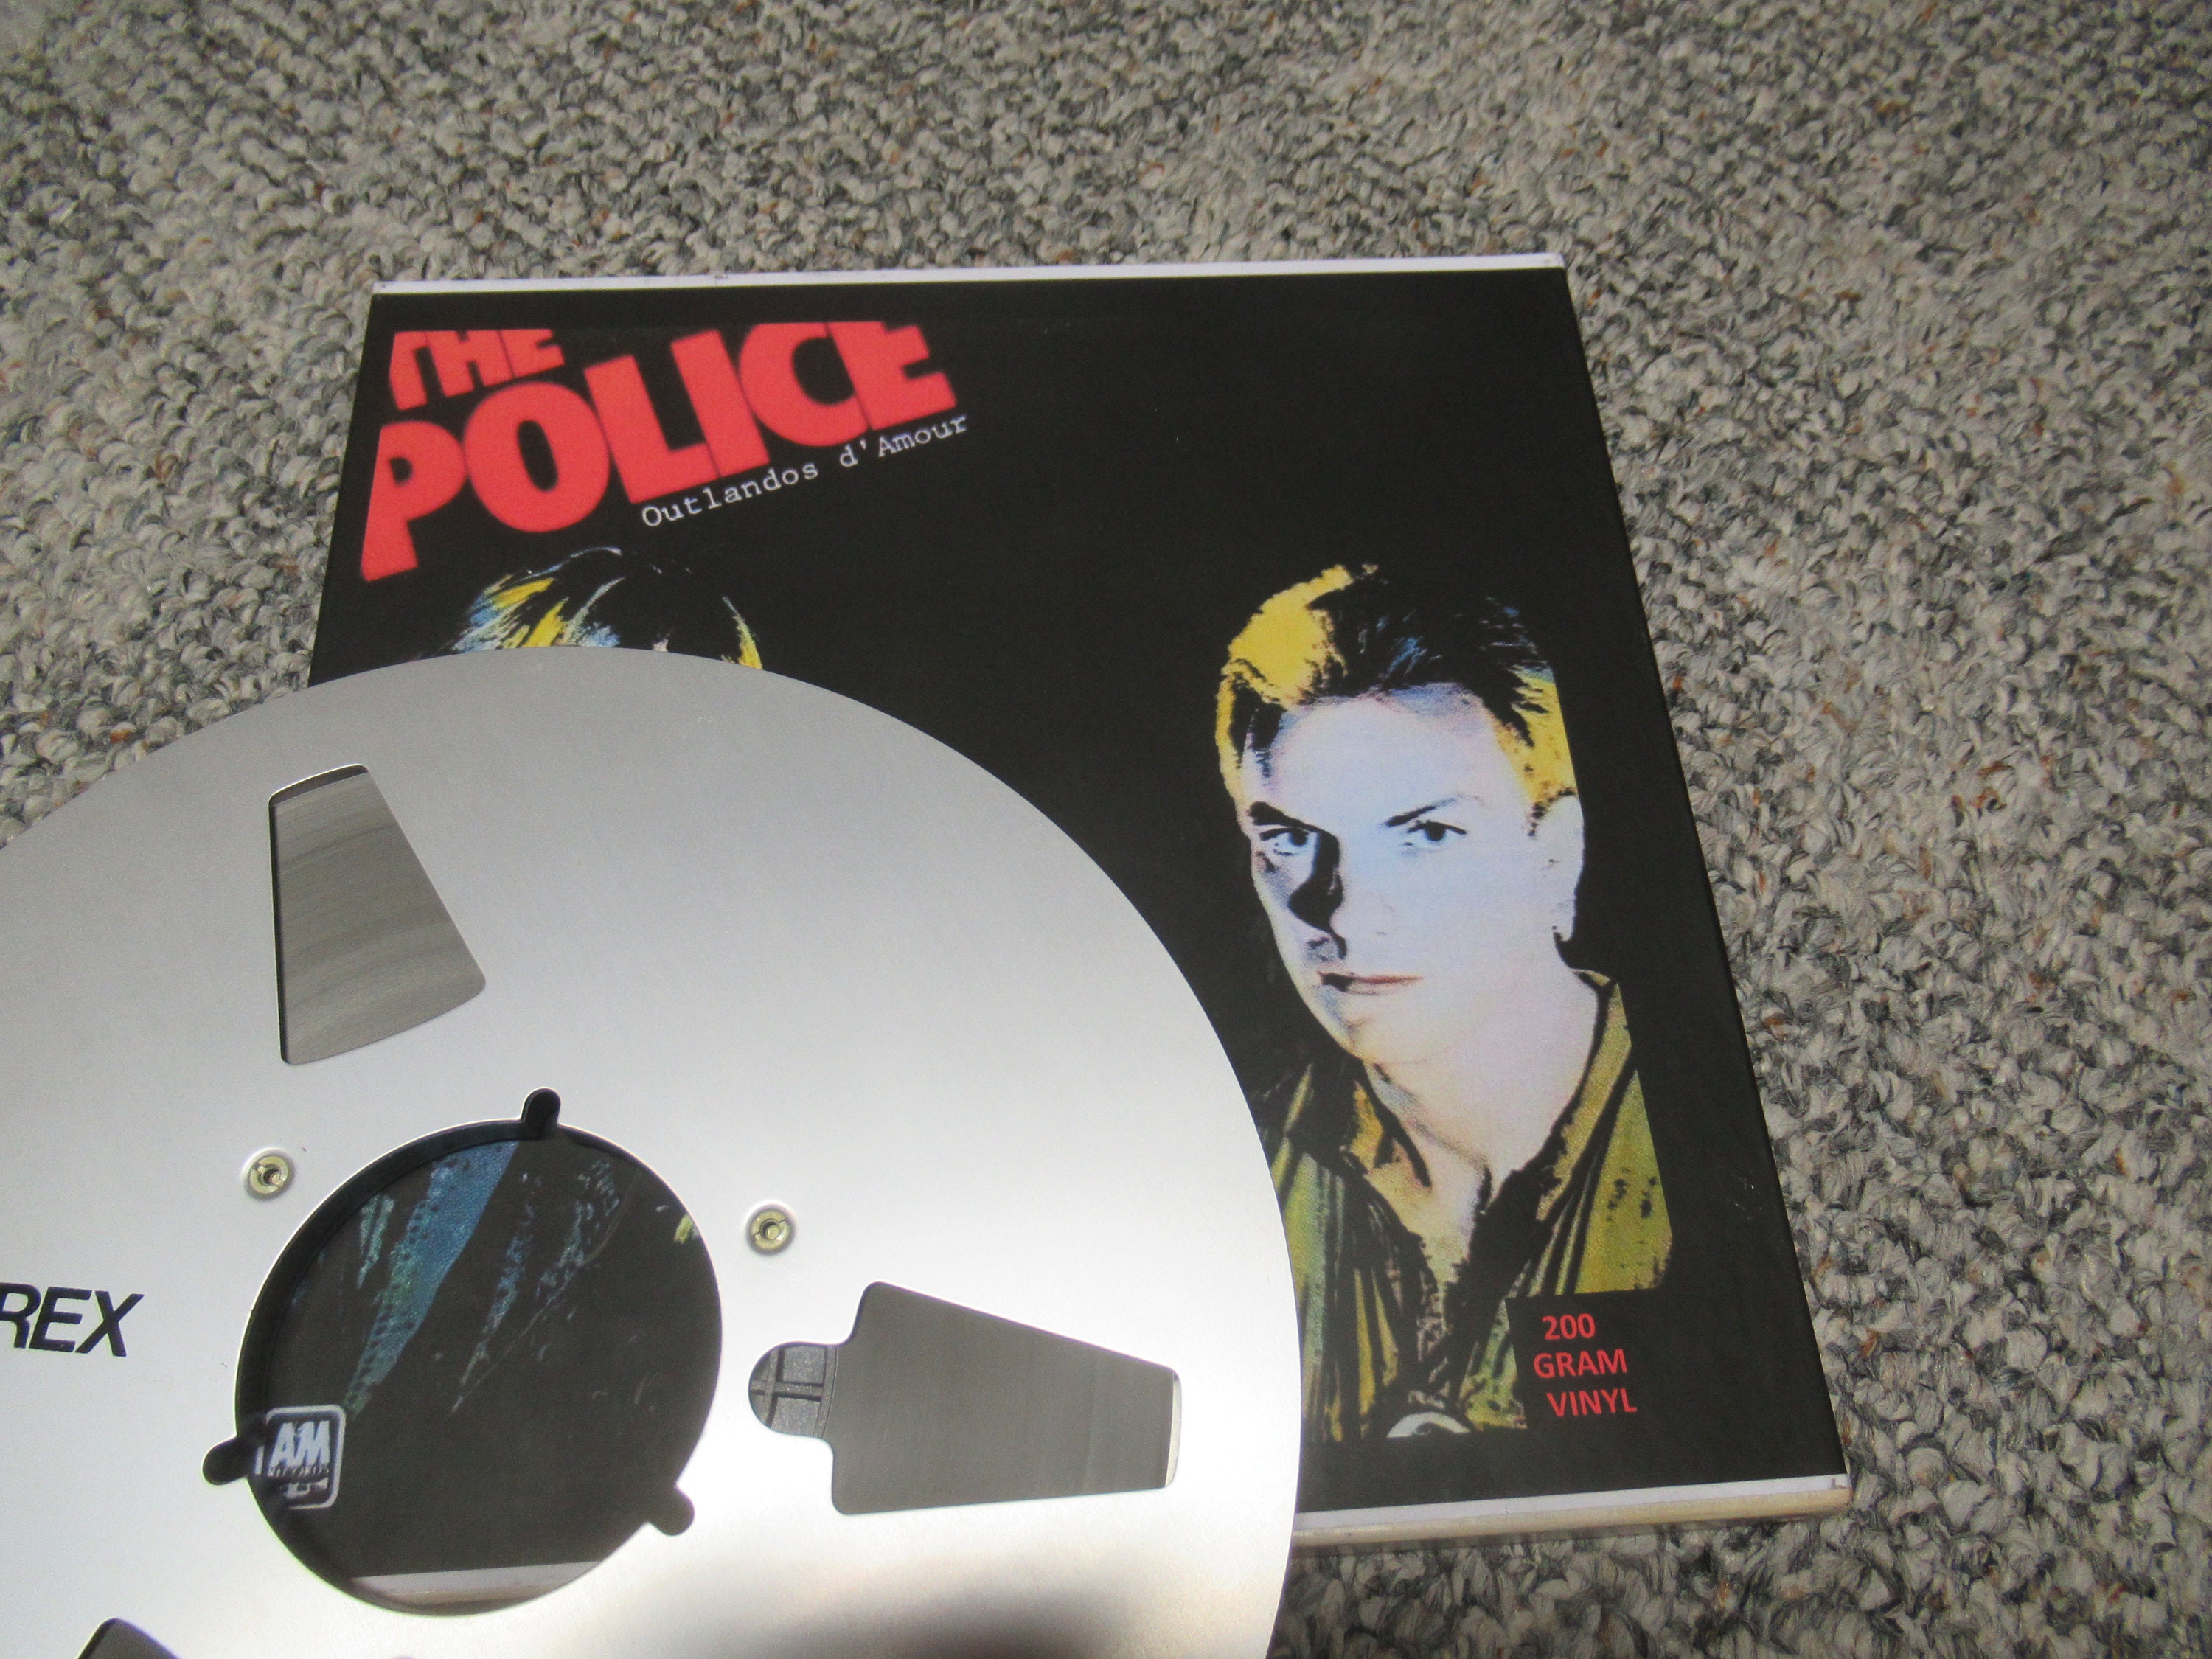 Police Out'landos D'amour 2 Track 15 IPS Reel to Reel Tape 